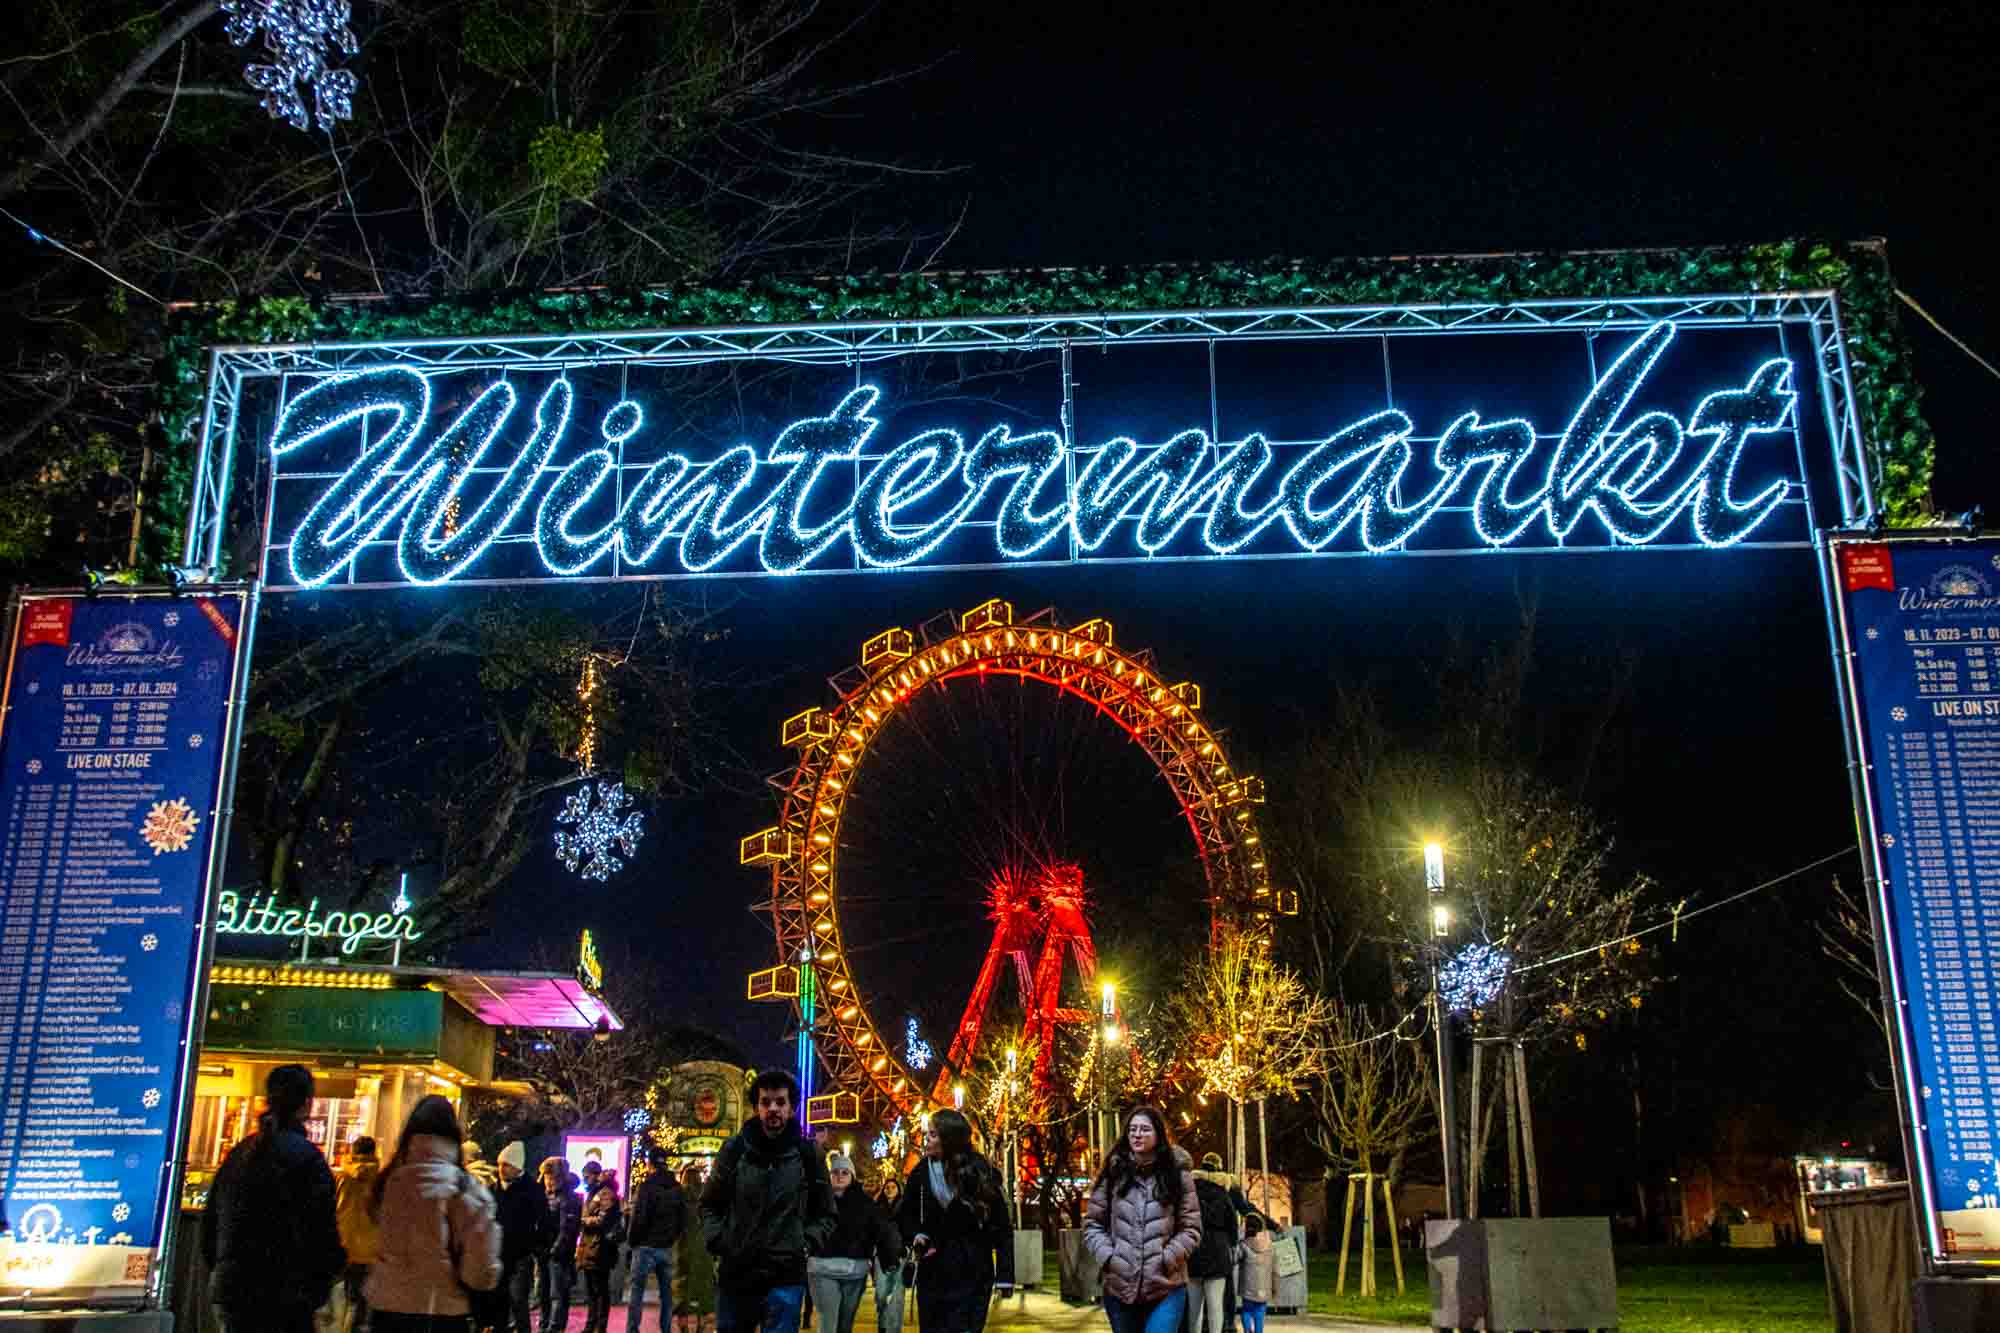 People walking by an illuminated Ferris wheel framed by an illuminated sign for "Wintermarkt" (Winter Market).